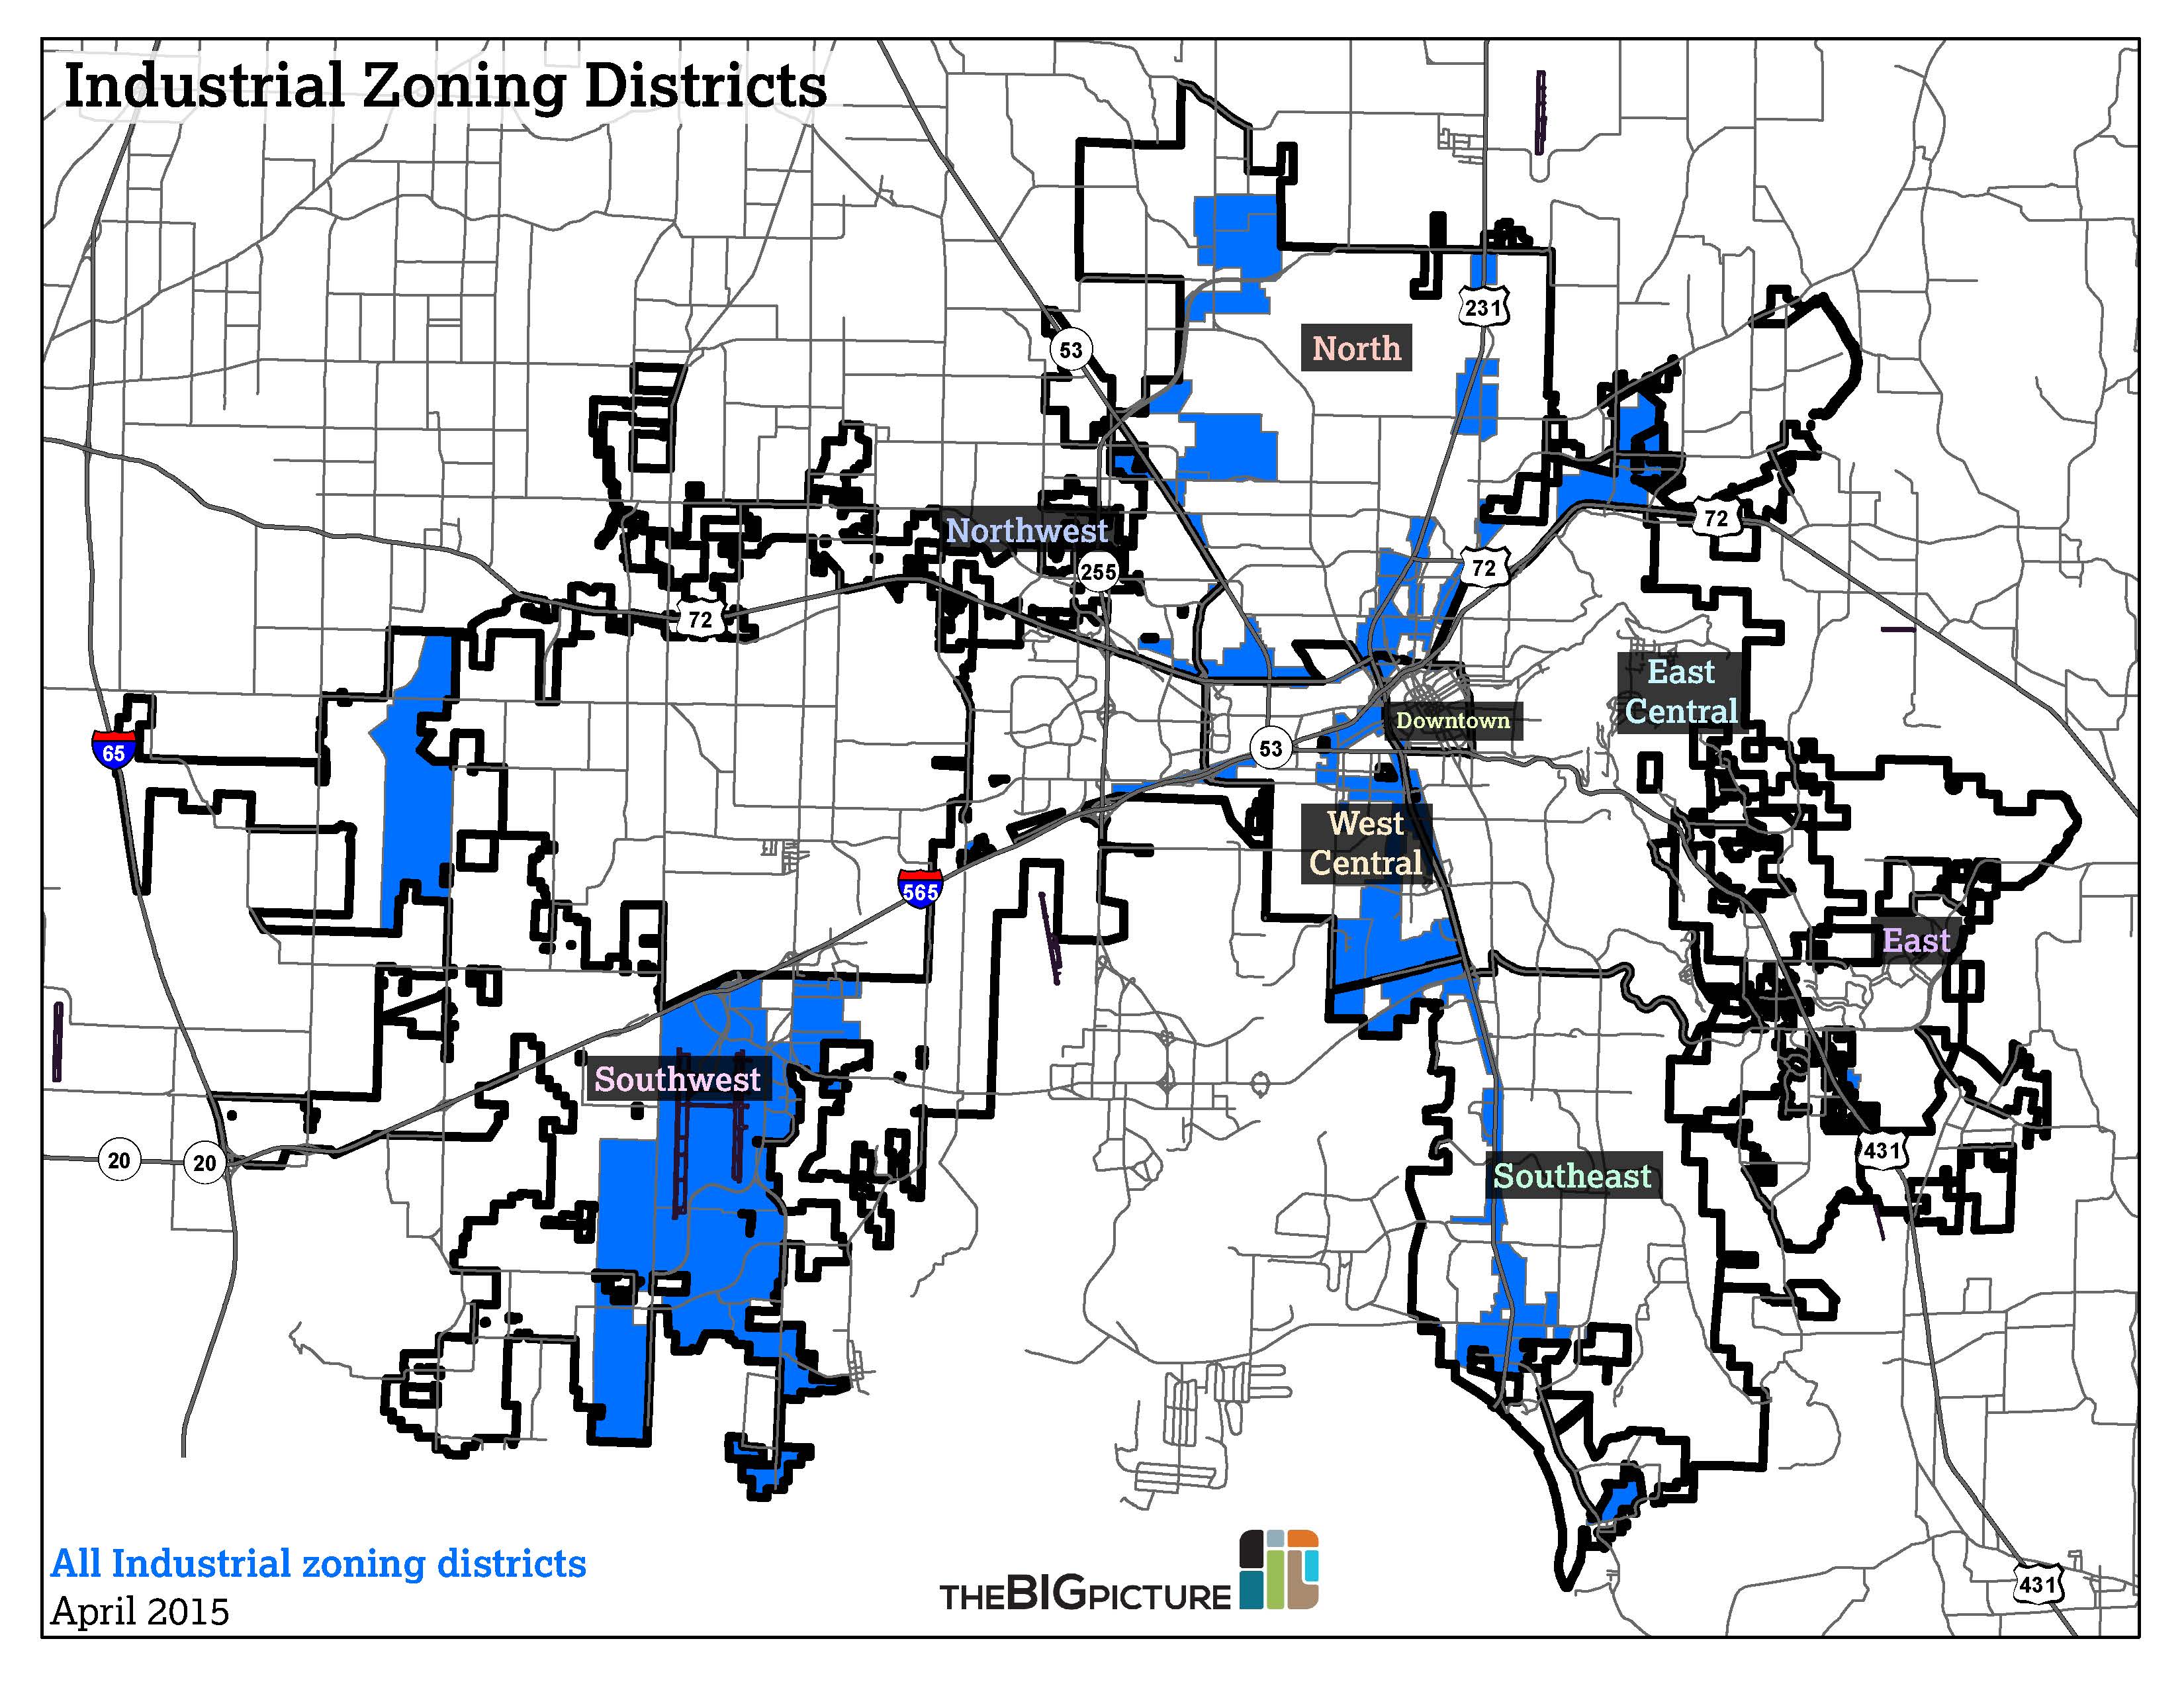 Industrial Zoning Districts